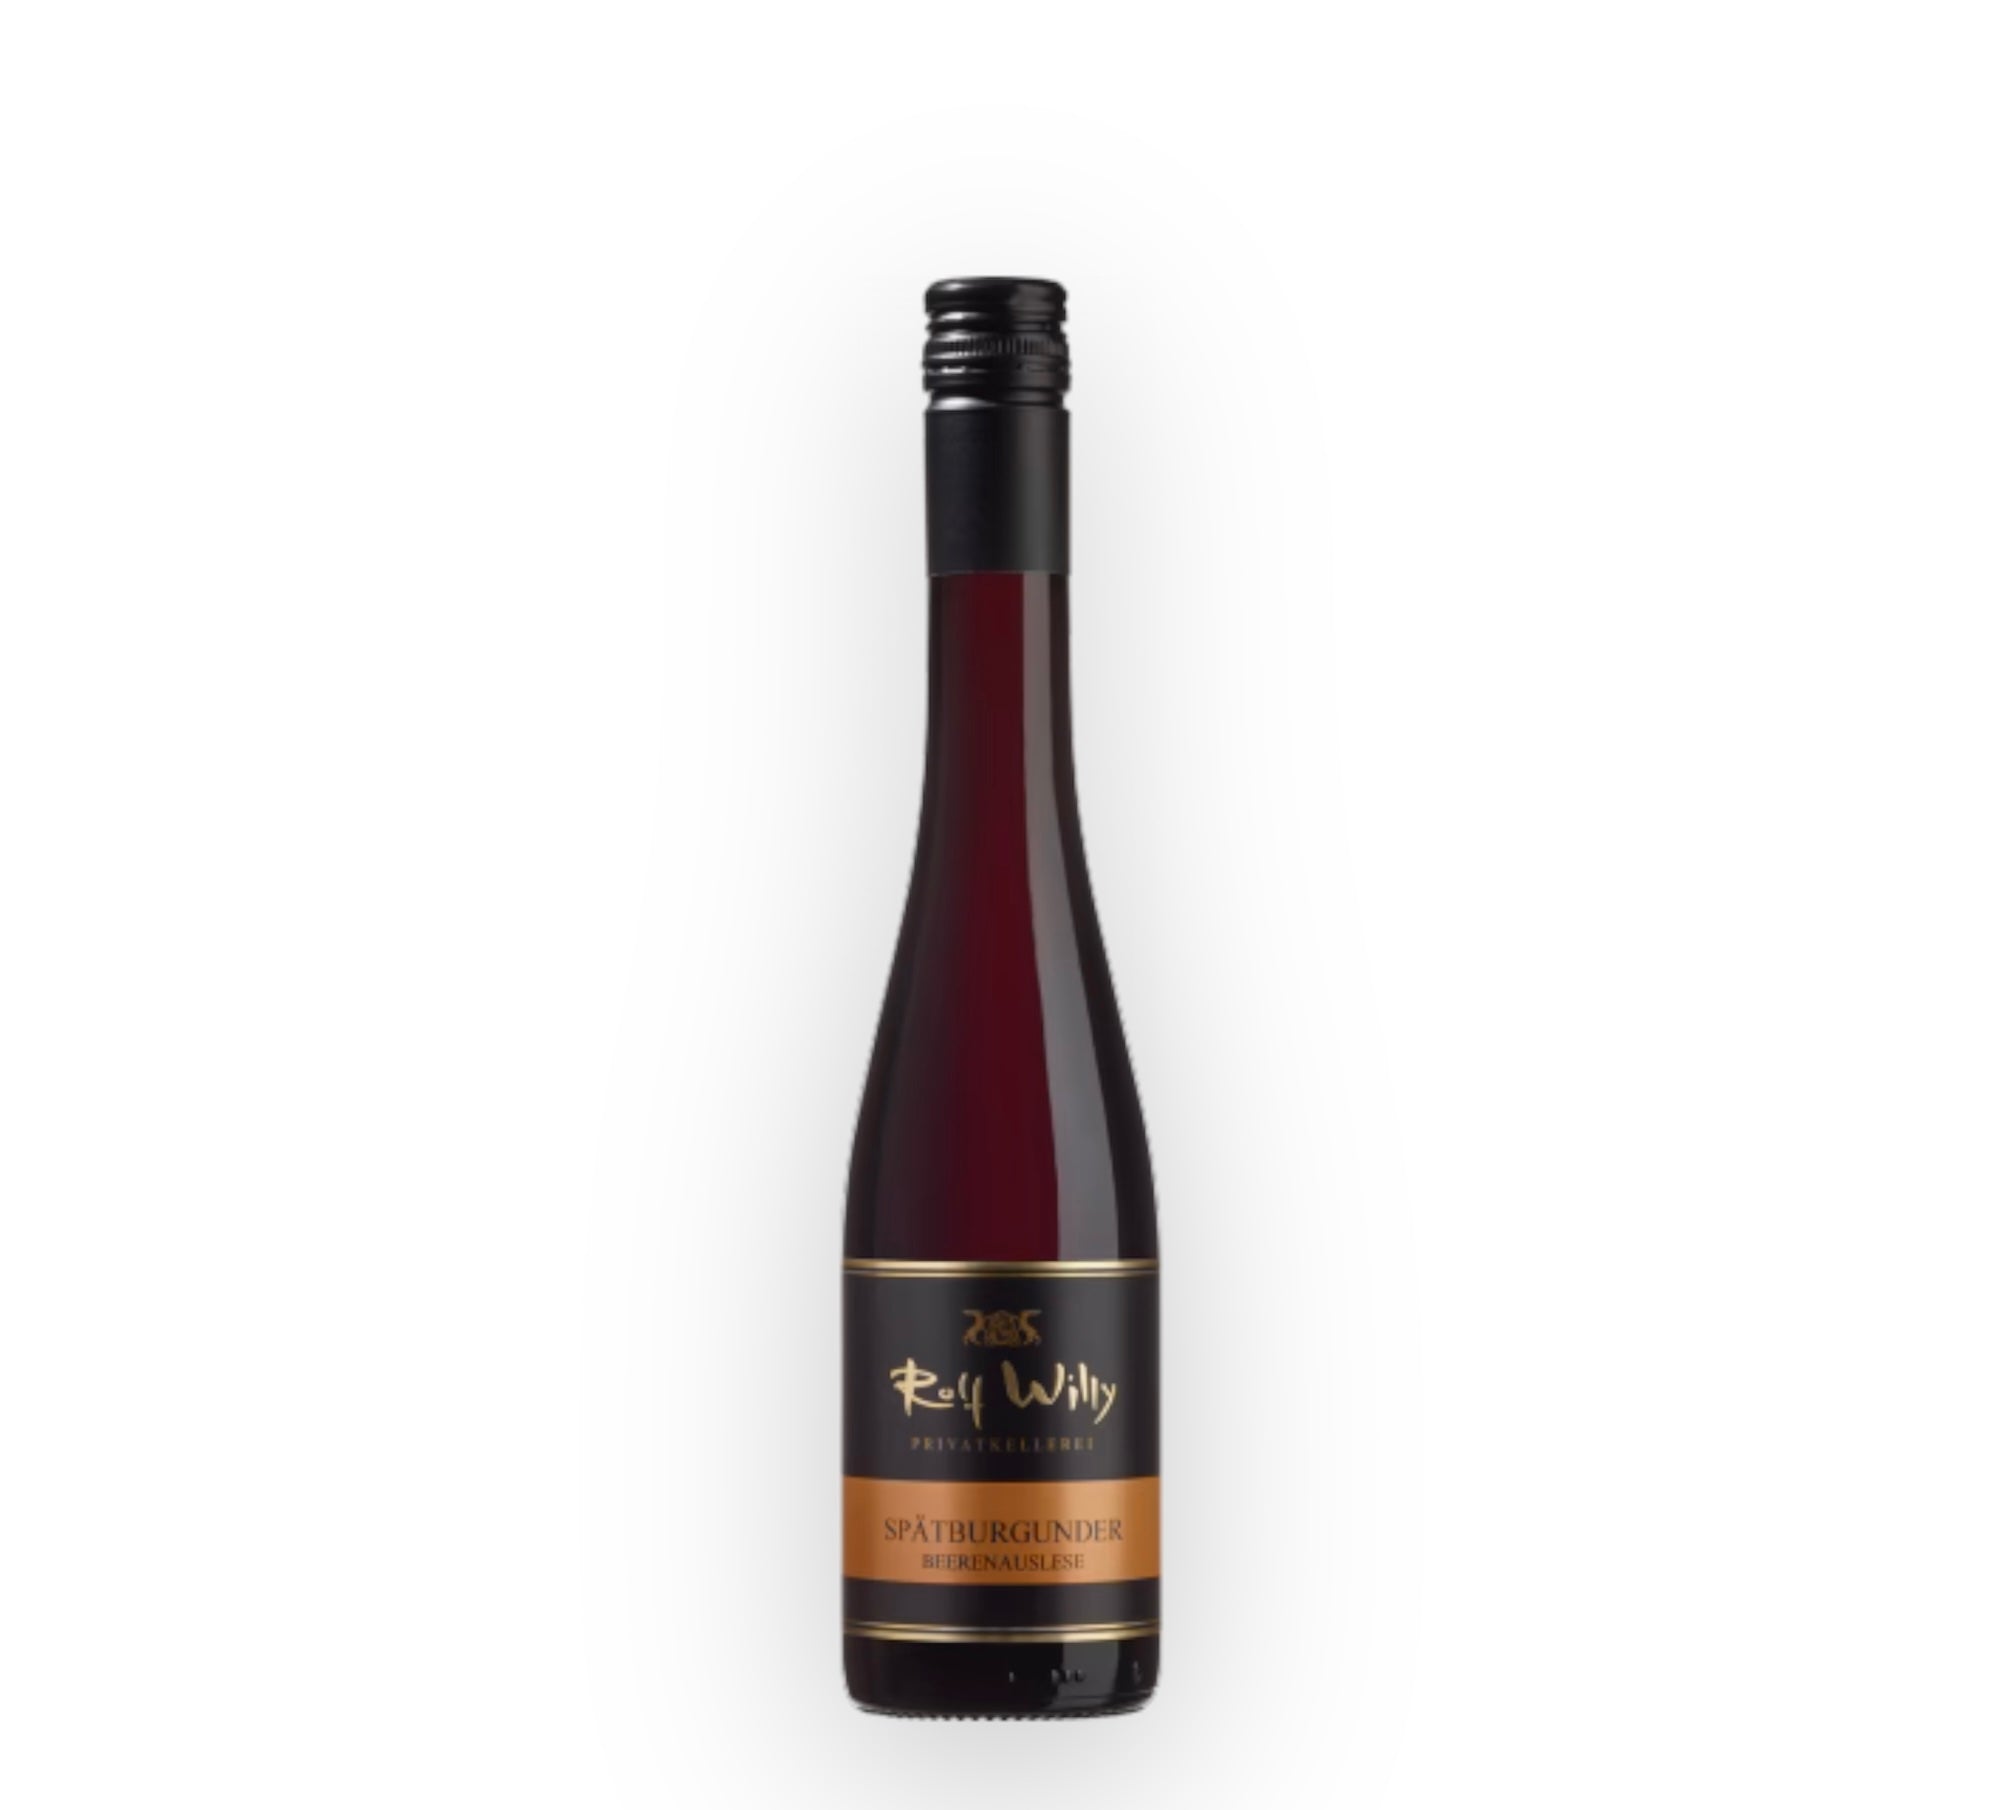 Rolf Willy Pinot Noir Beerenauslese 2018 0.375l